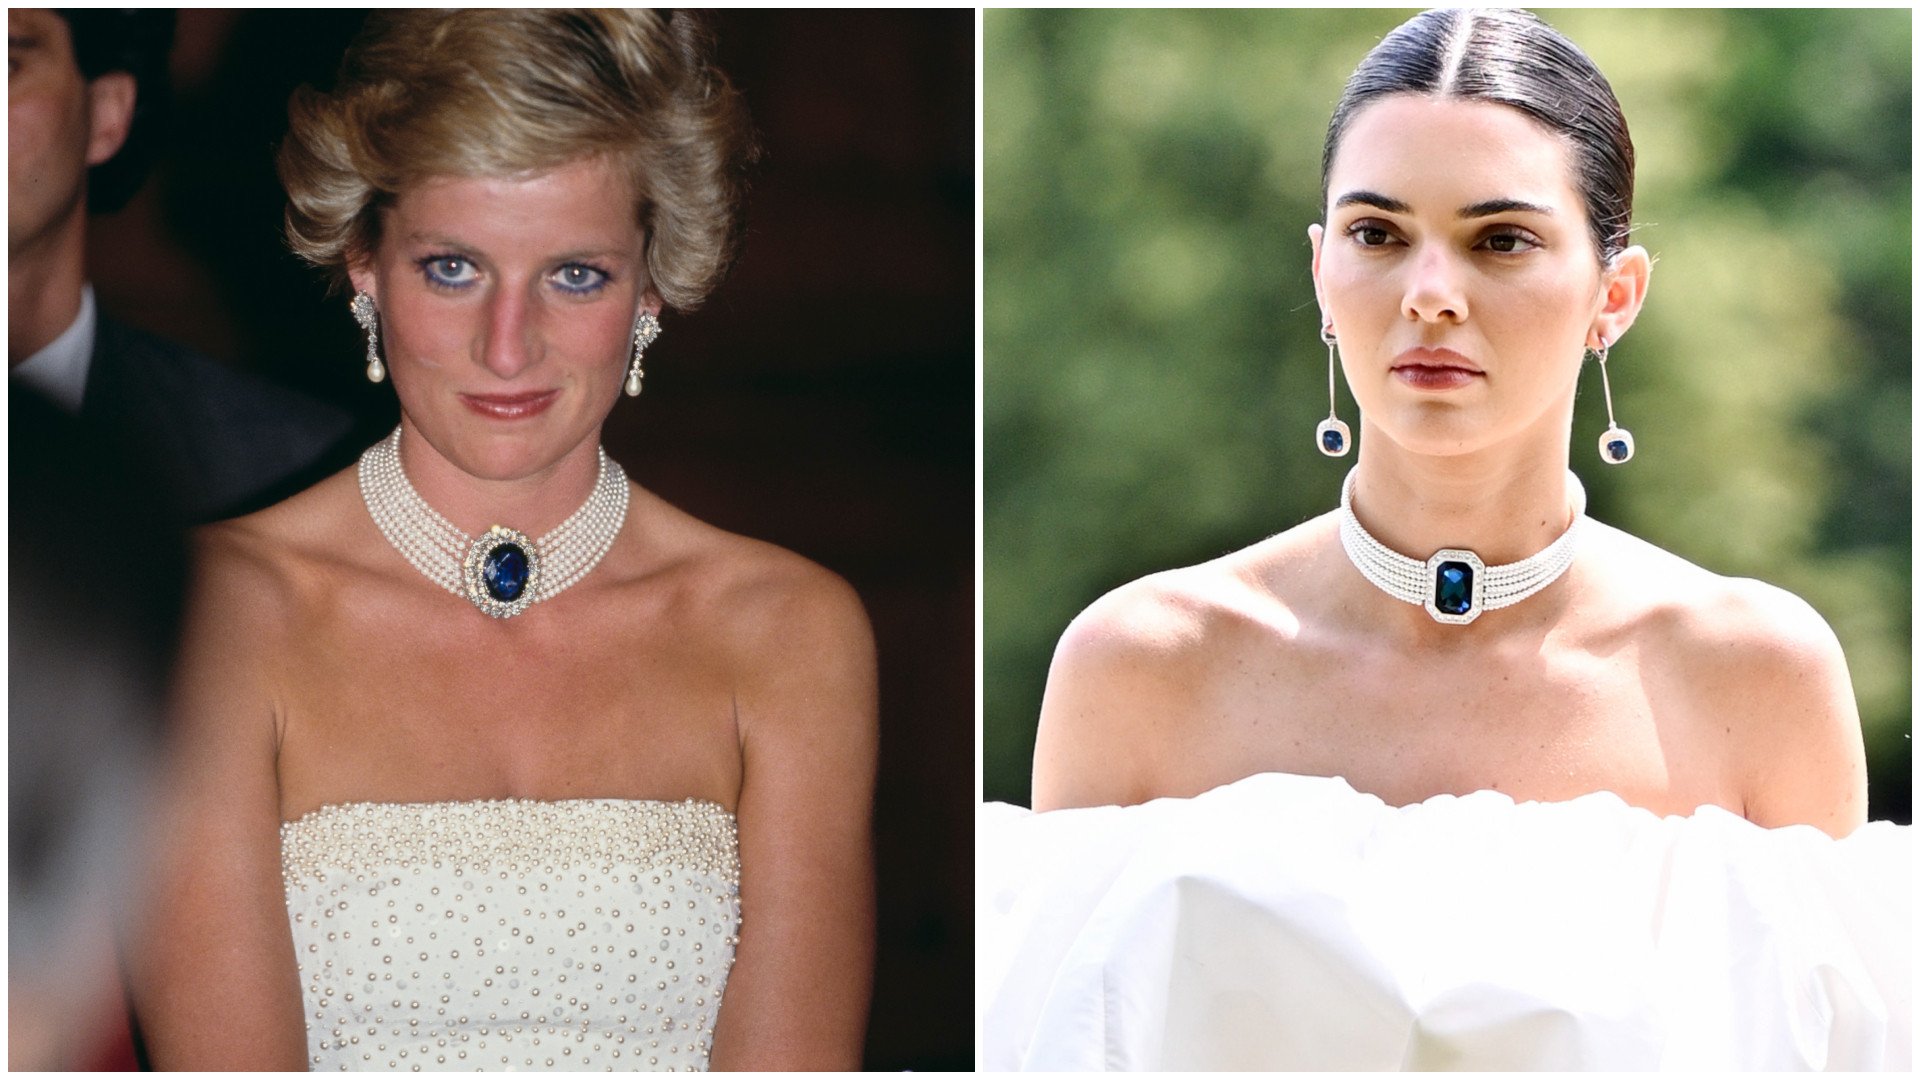 From Princess Diana to Kendall Jenner, chokers and neck jewellery have endured to this day, with a history dating back to the ancient Egyptians and Vikings, through Anne Boleyn to Princess Diana and the fashion runways and high streets of the 21st century. Photos: Getty